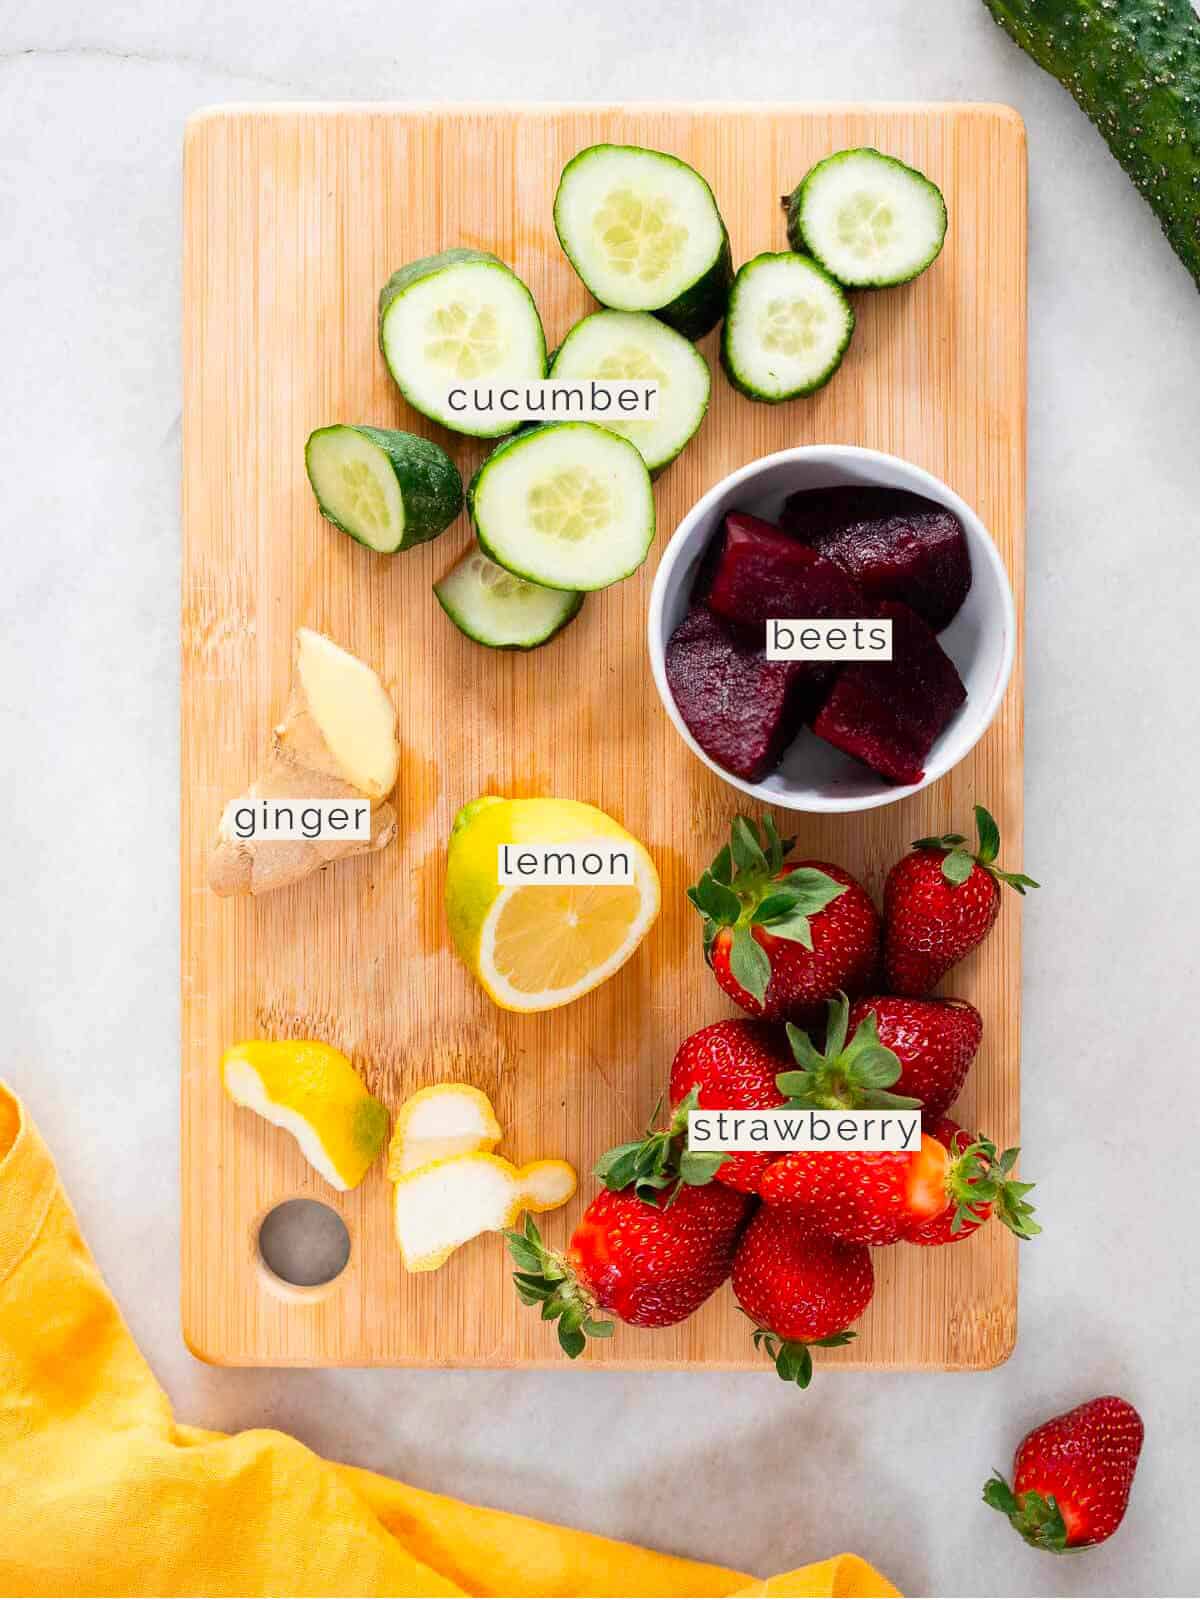 labeled ingredients to make juice for bloating.